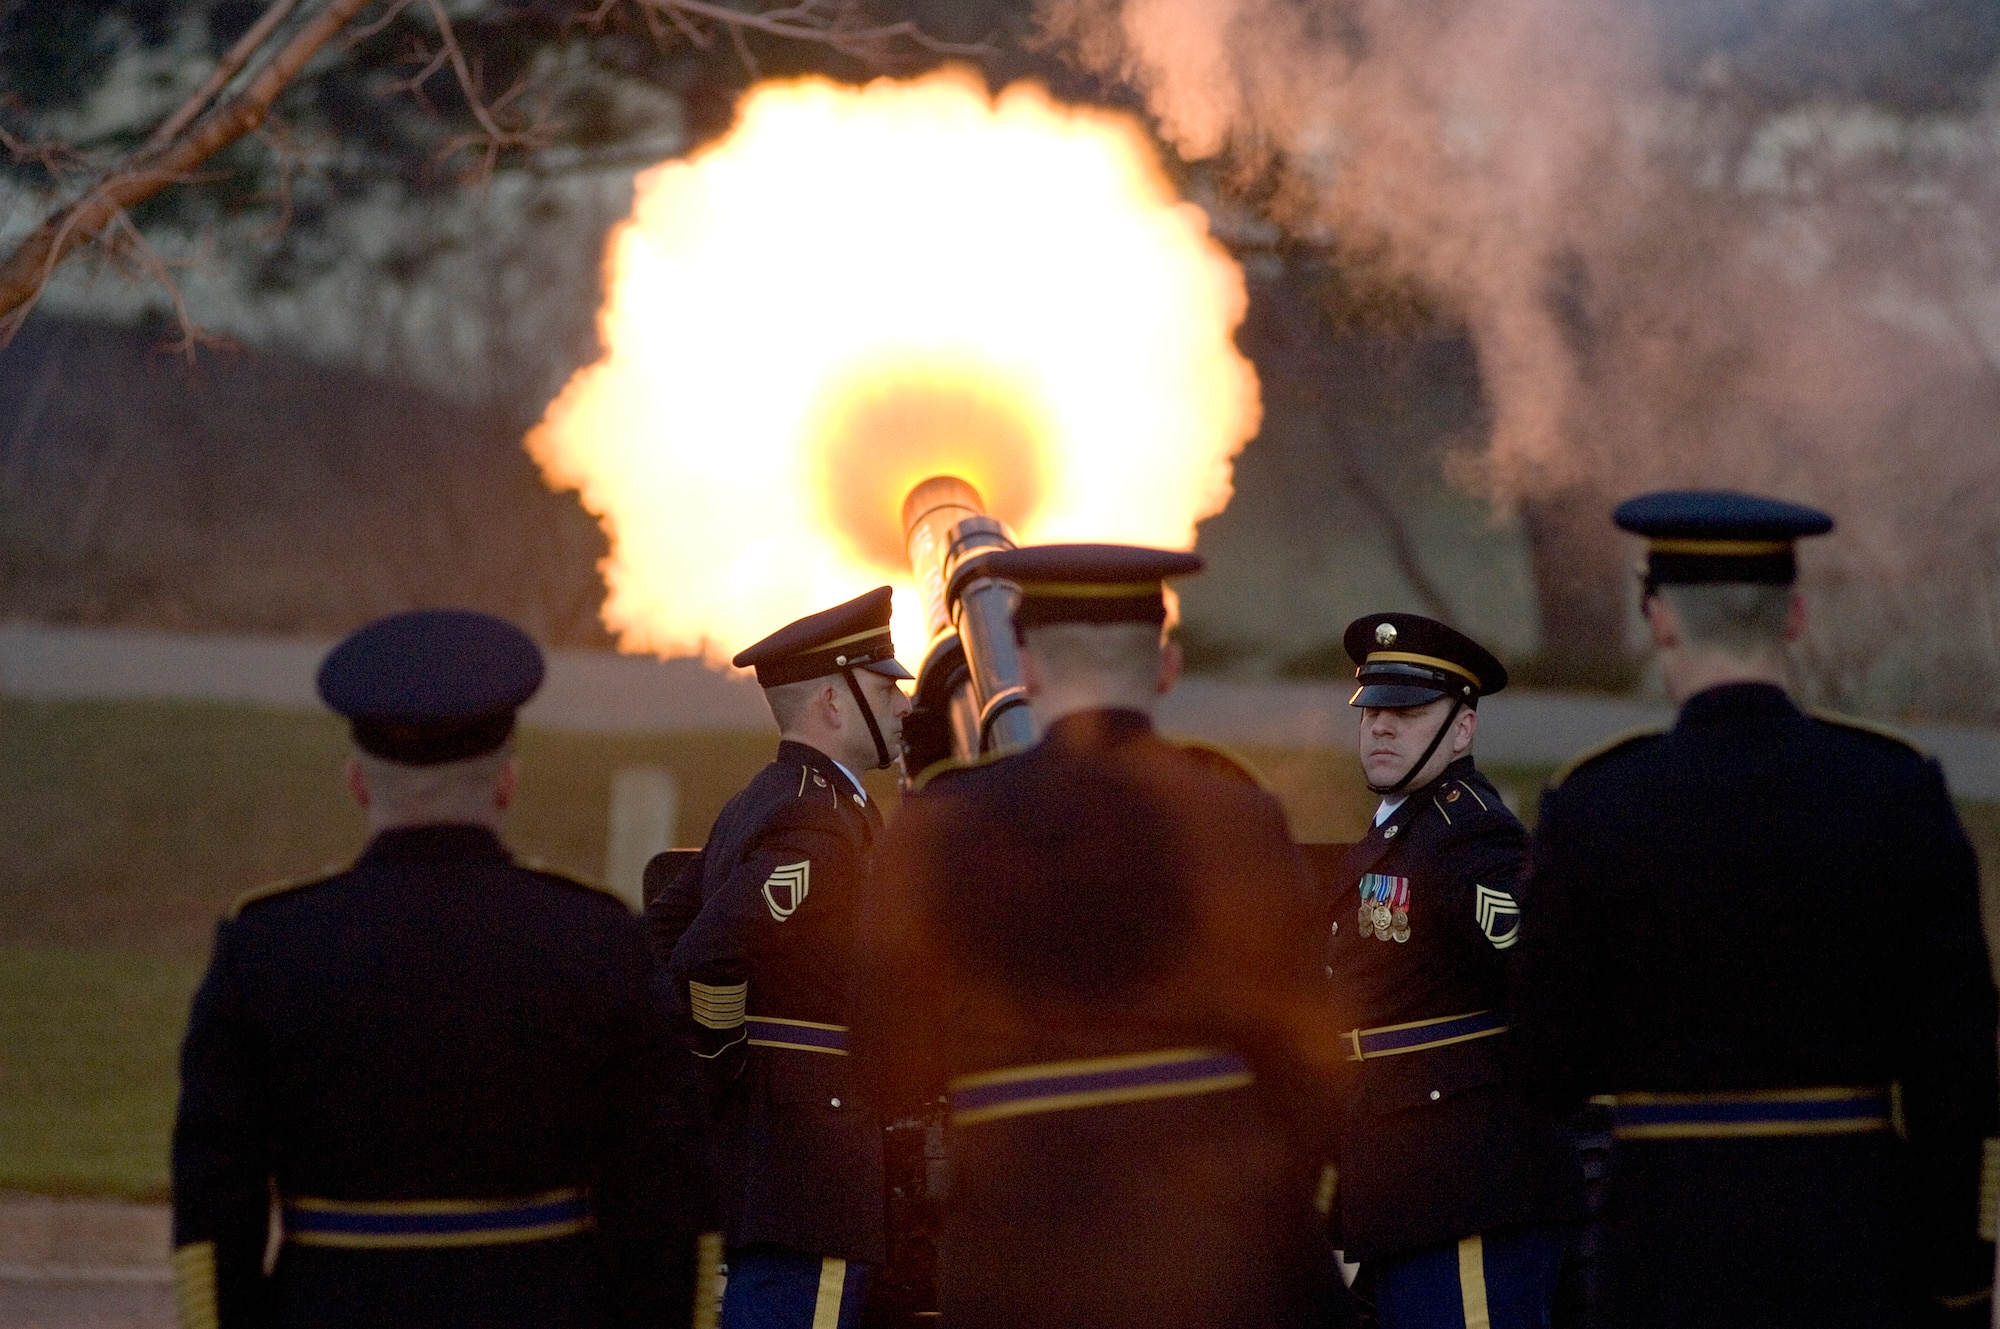 The 1st Battalion of the Michigan National Guard's 119th Field Artillery Regiment fires off a canon during the 21-gun salute to honor President Gerald R. Ford at the Gerald R. Ford Presidential Library and Museum Jan. 3 in Grand Rapids, Mich. (U.S. Air Force photo/Tech. Sgt. Cecilio M. Ricardo Jr.)